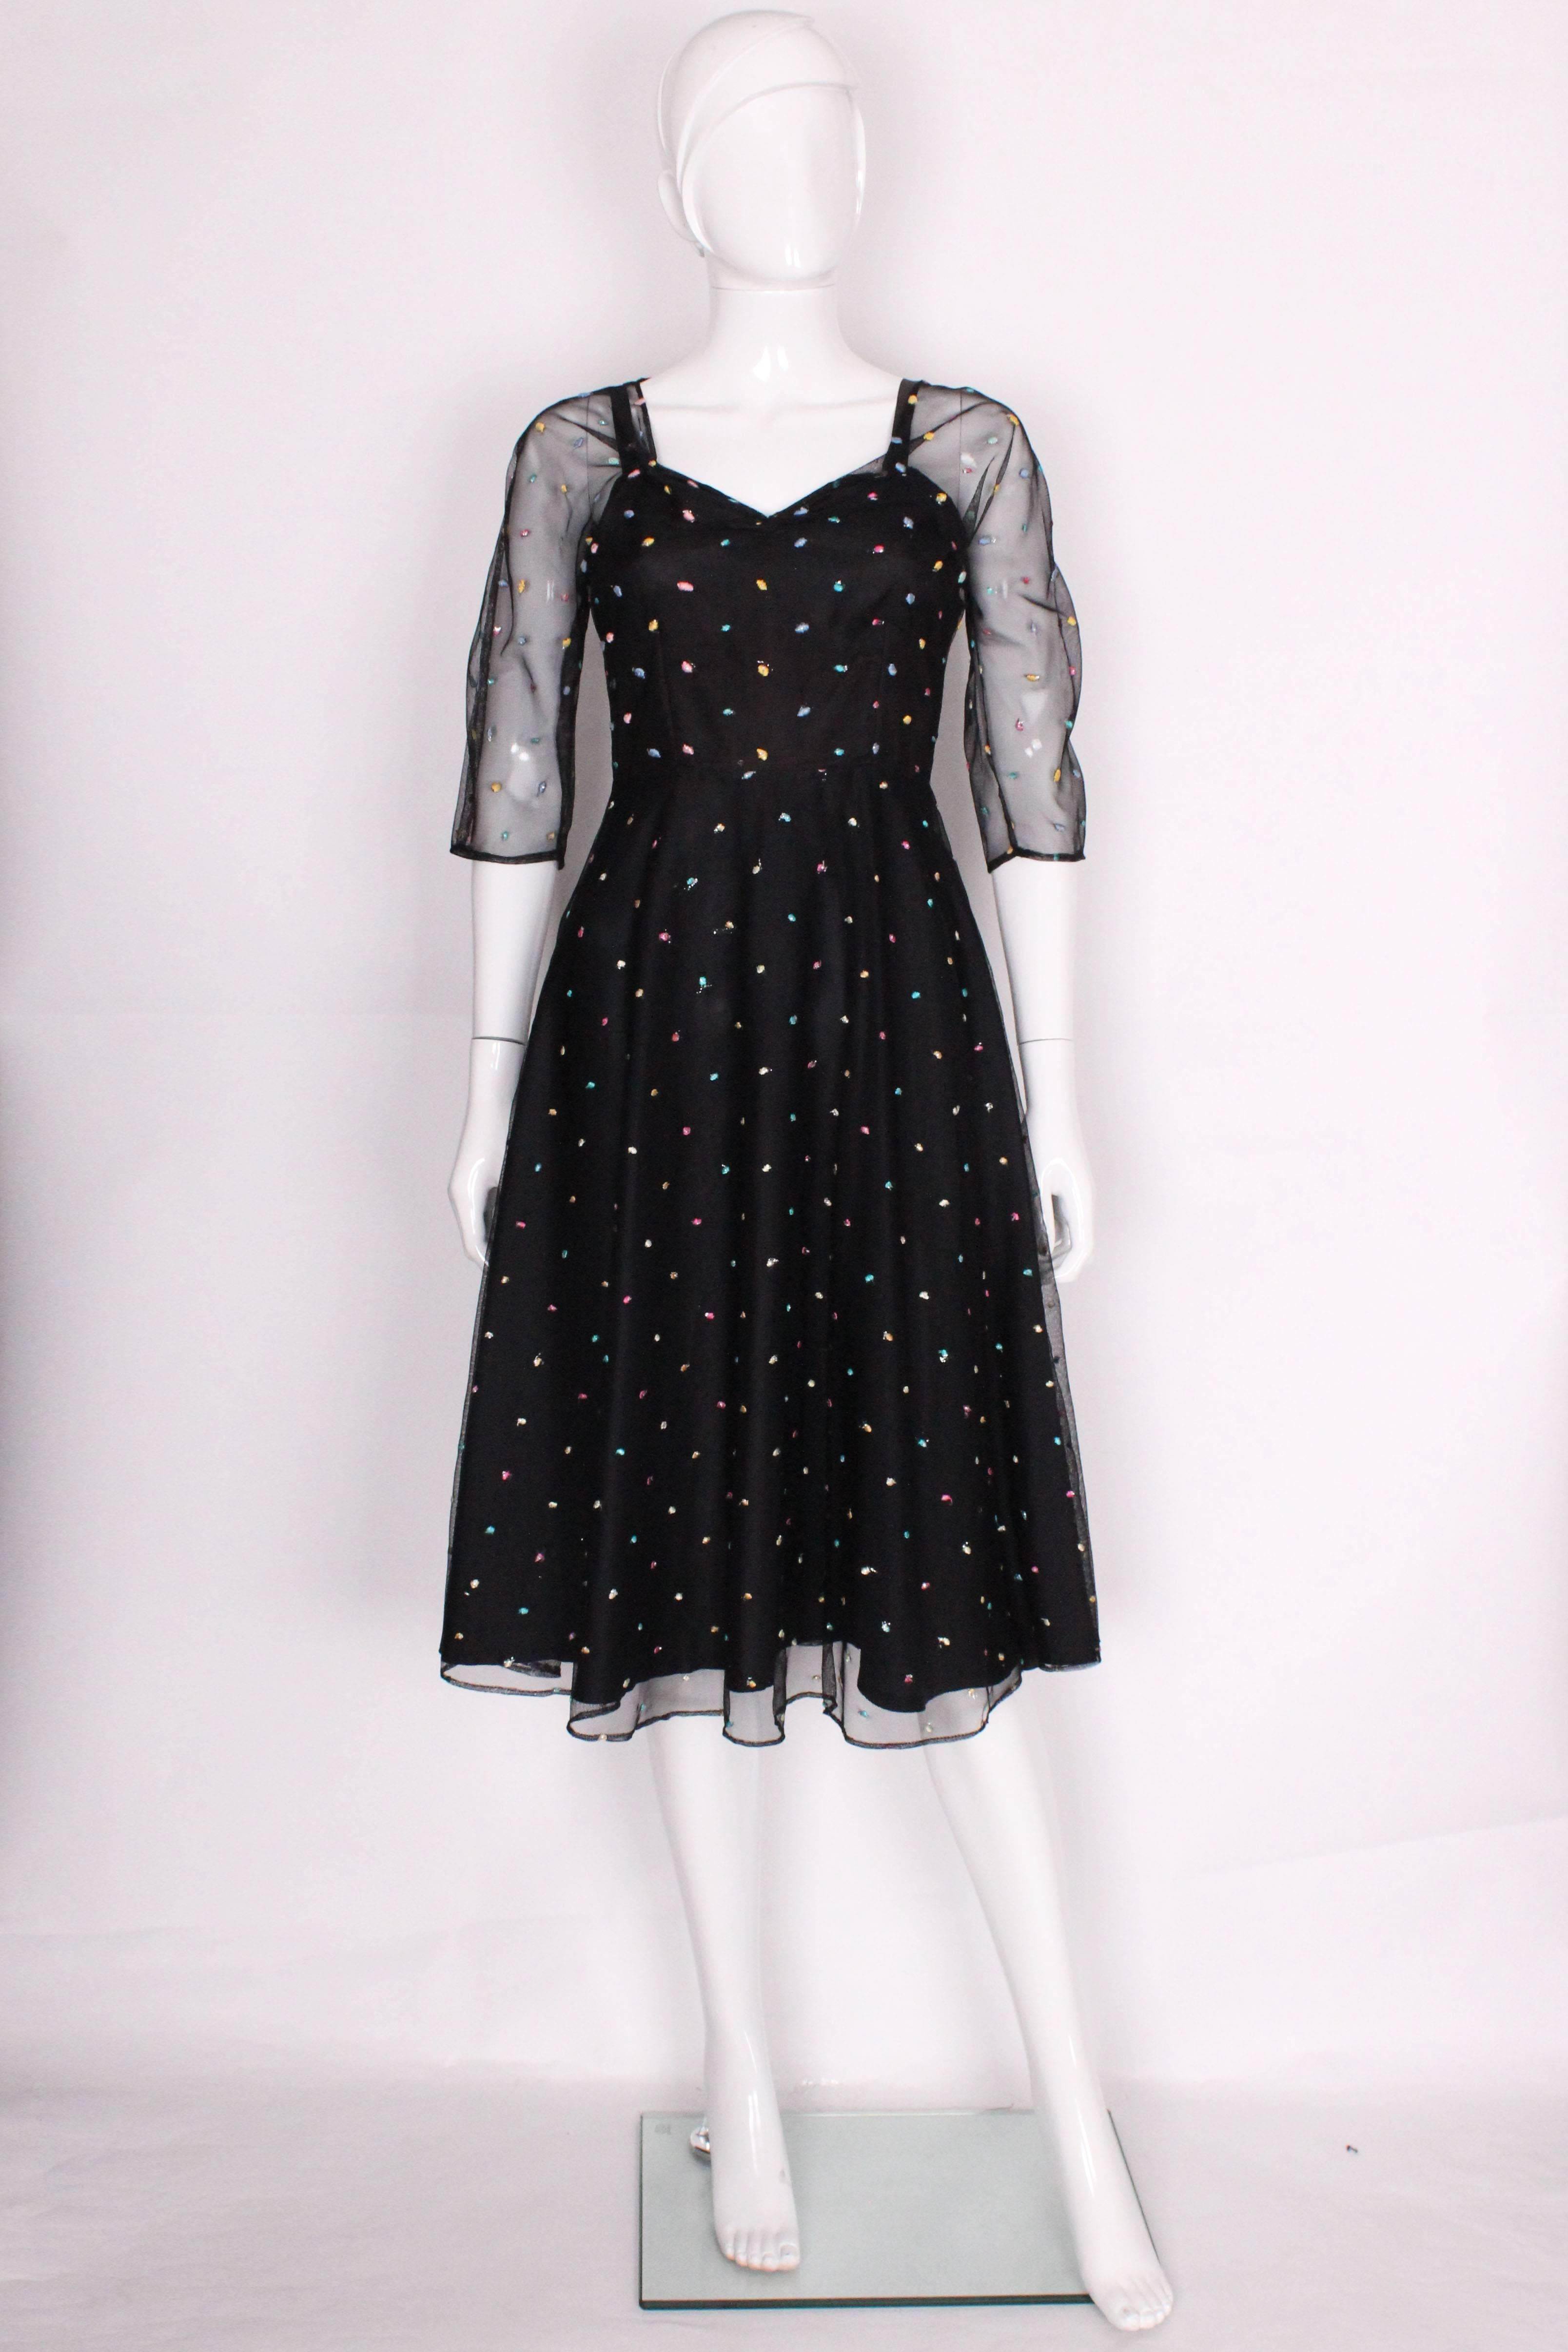 A great party dress by Radley. The dress has an underdress in black , overlayed in black net with sewn spots in many colours. It has elbow length sleeves, a sweetheart neckline, and central back zip.